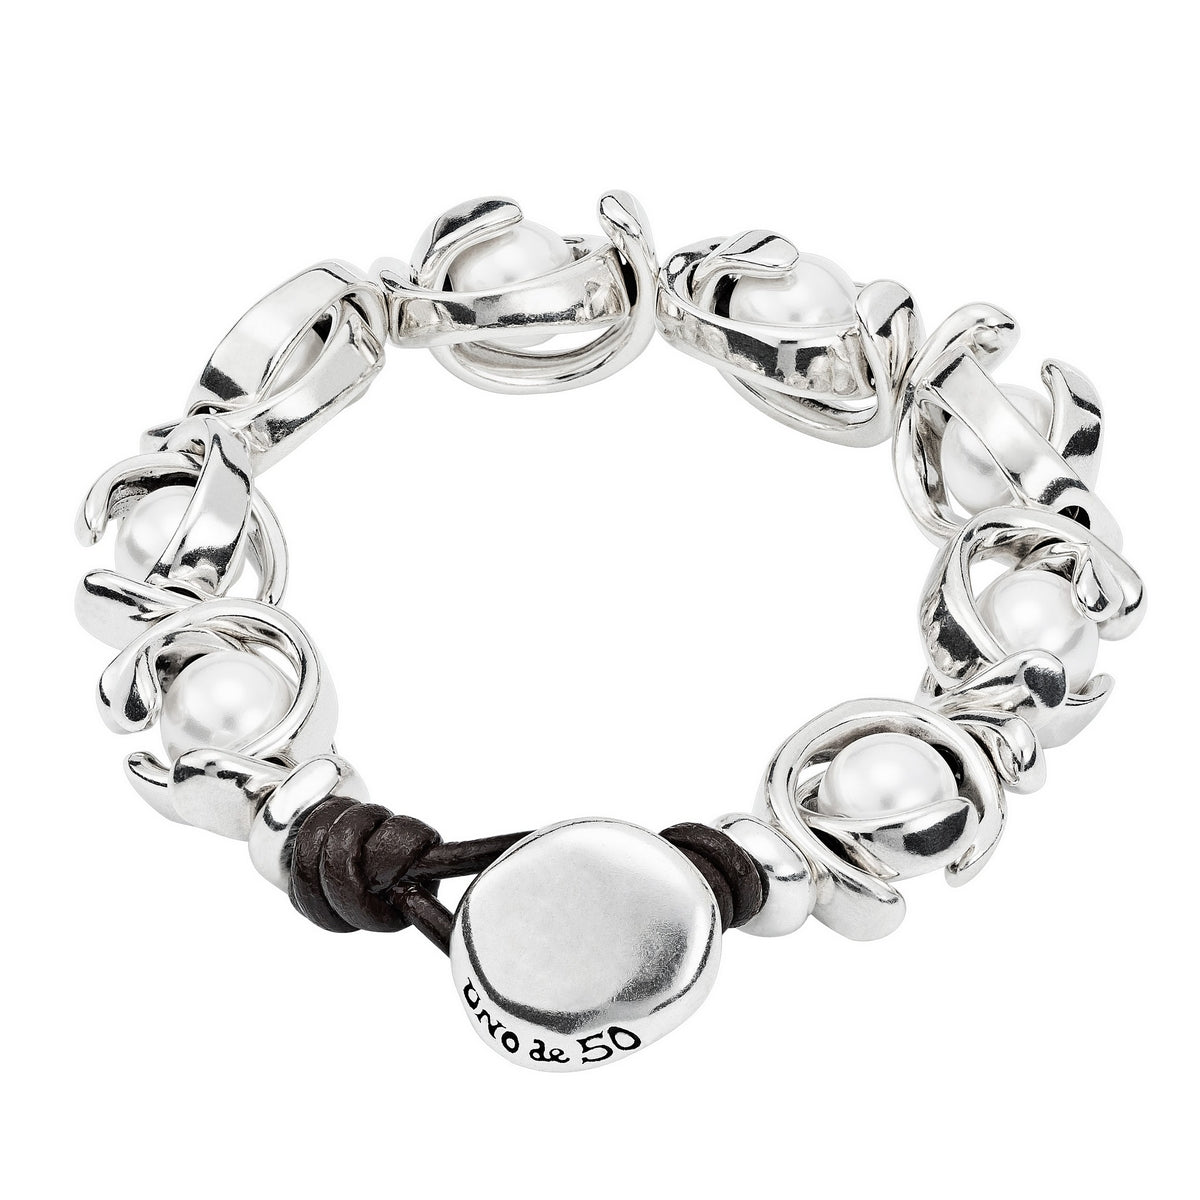 uno de 50 double moon 1-strand silver-plated metal alloy bracelet with 8 two moon-shaped charm, 8 pearls and button clasp